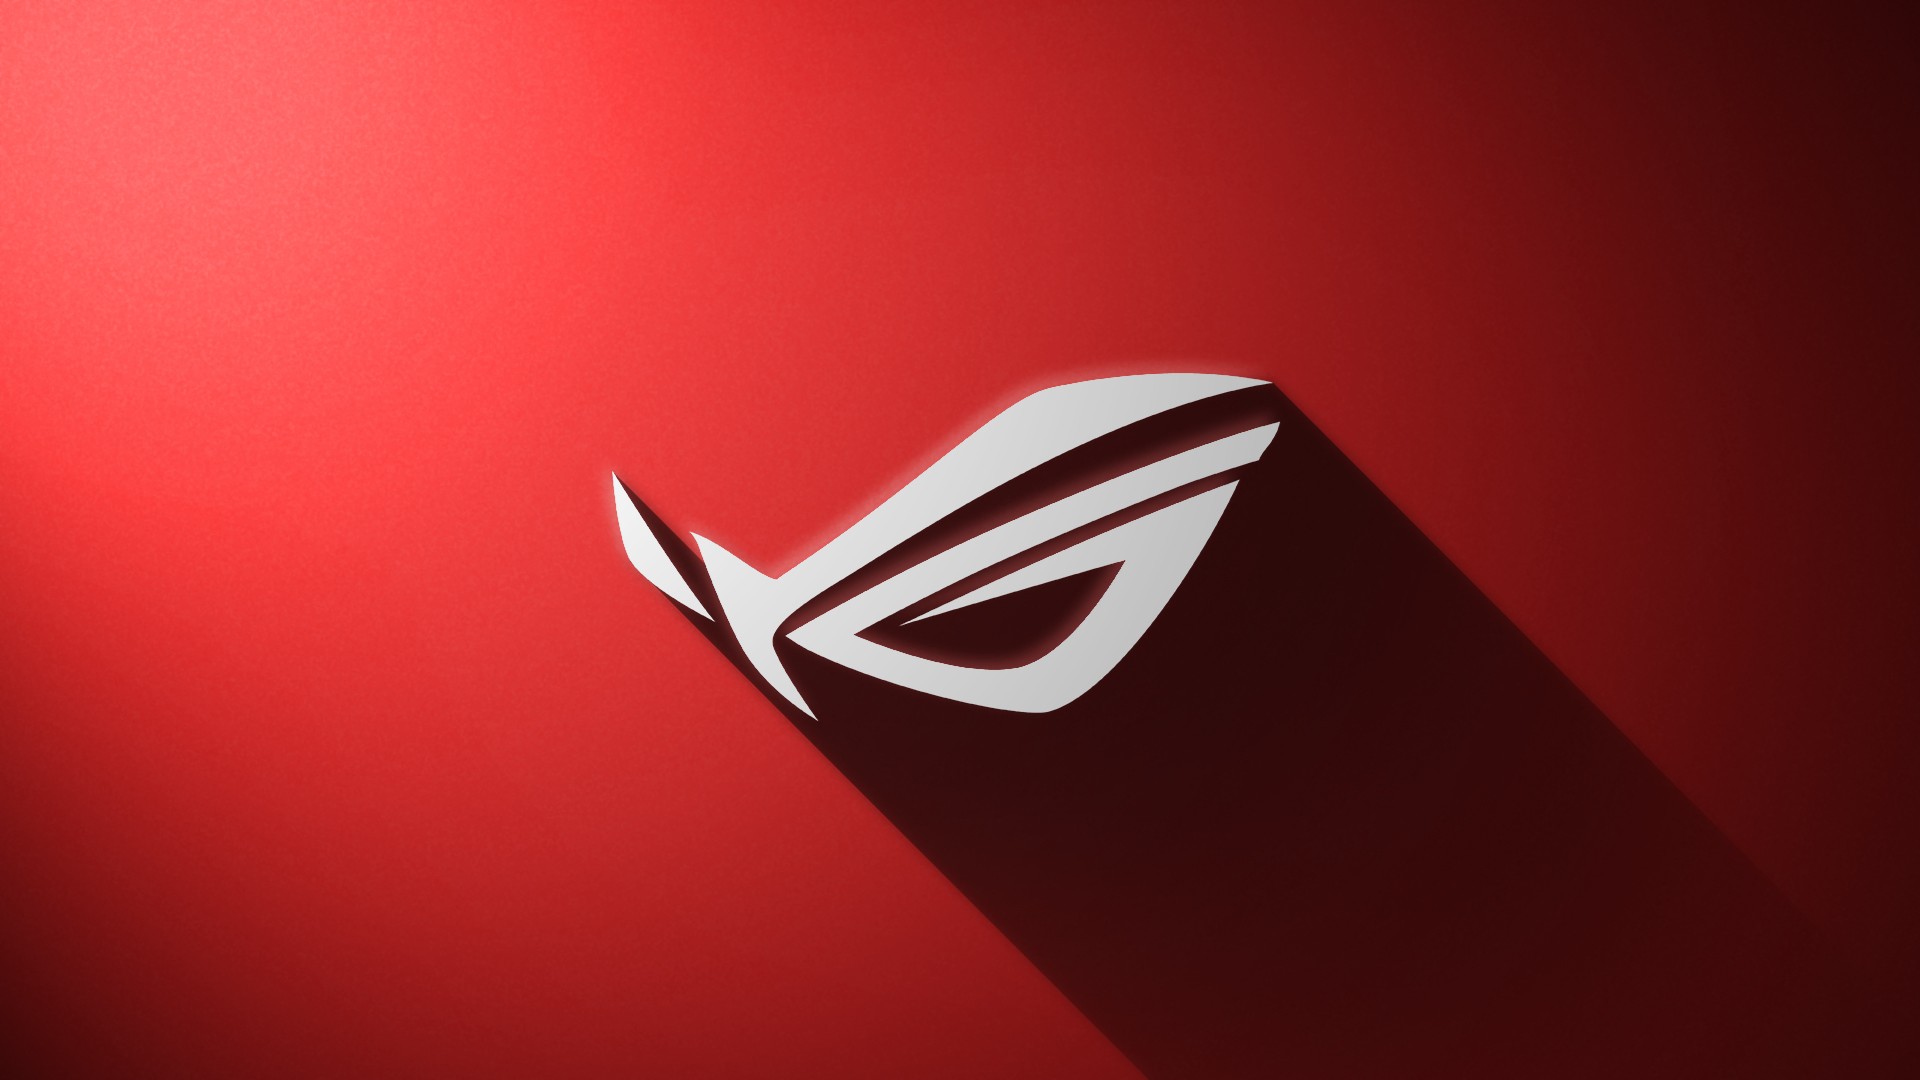 General 1920x1080 Republic of Gamers logo shadow hardware ASUS PC gaming red background simple background